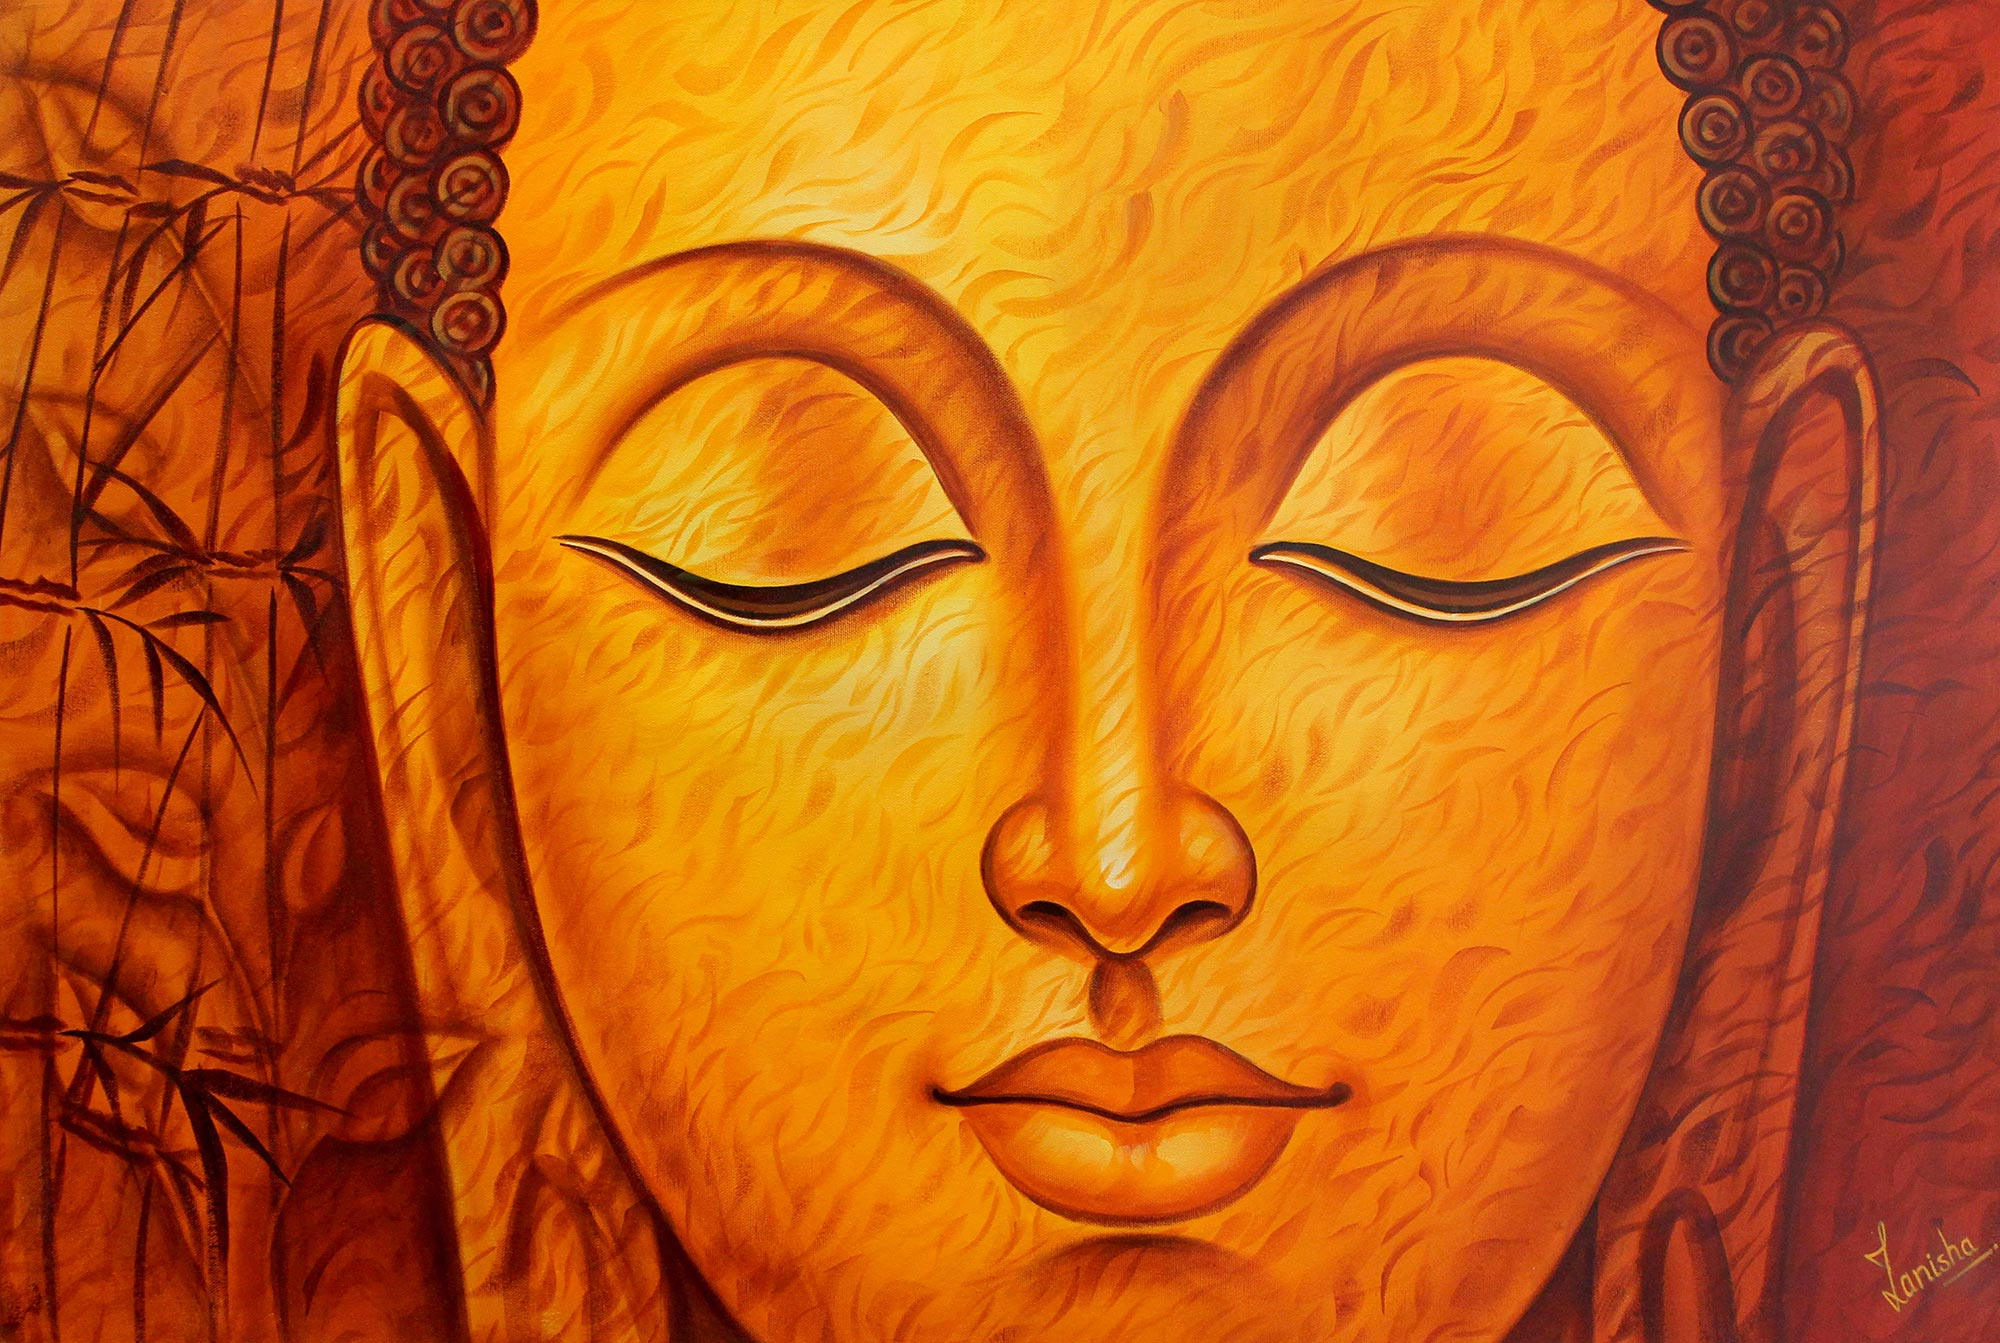 UNICEF Market Painting Of Buddha In Orange Palette By Indian